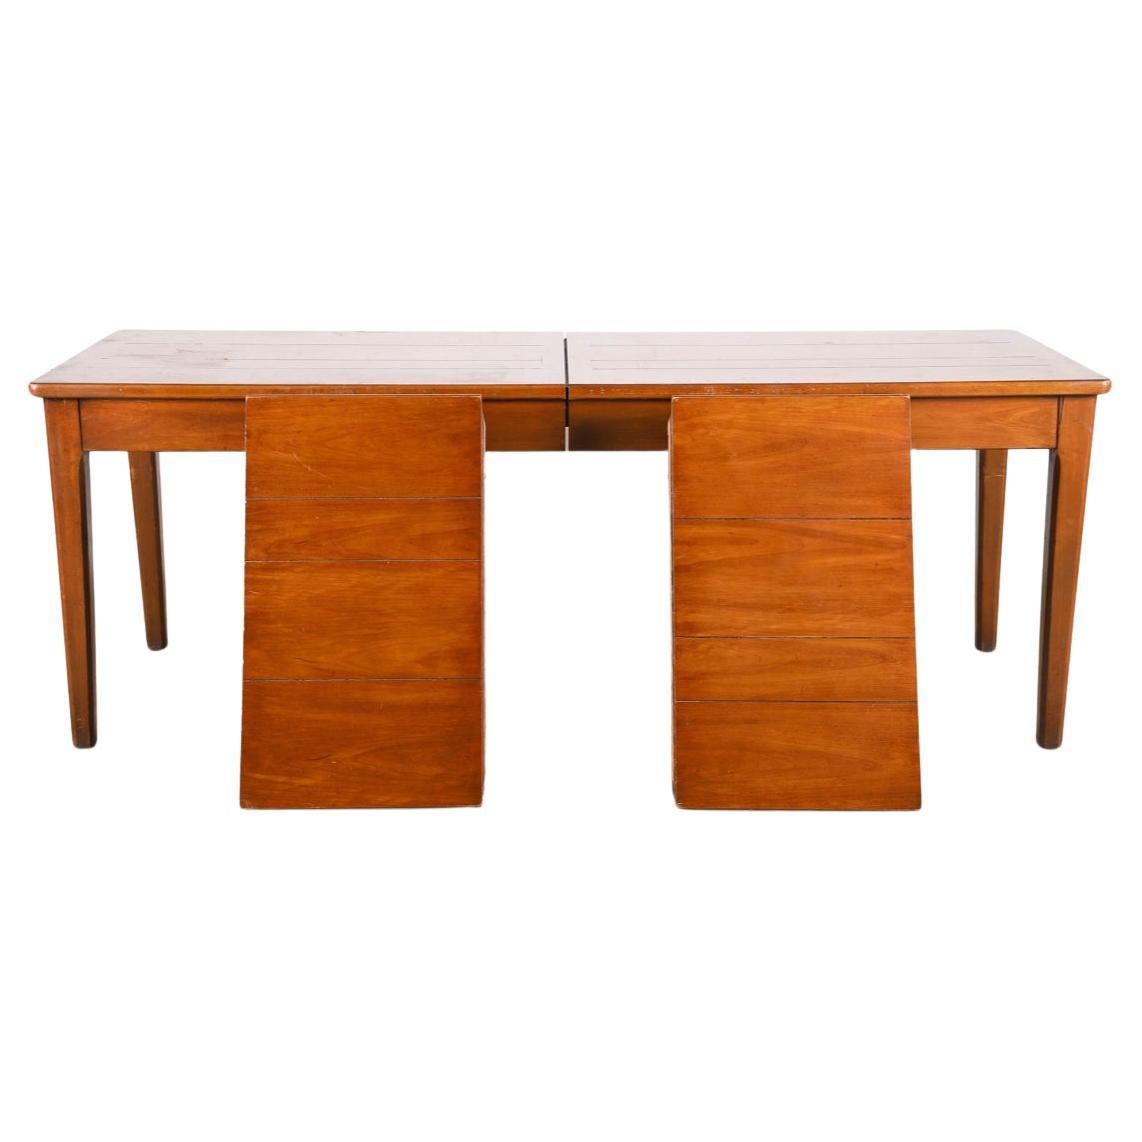 Rustic Mid century modern style farm table with 2 leaves John Stuart  For Sale